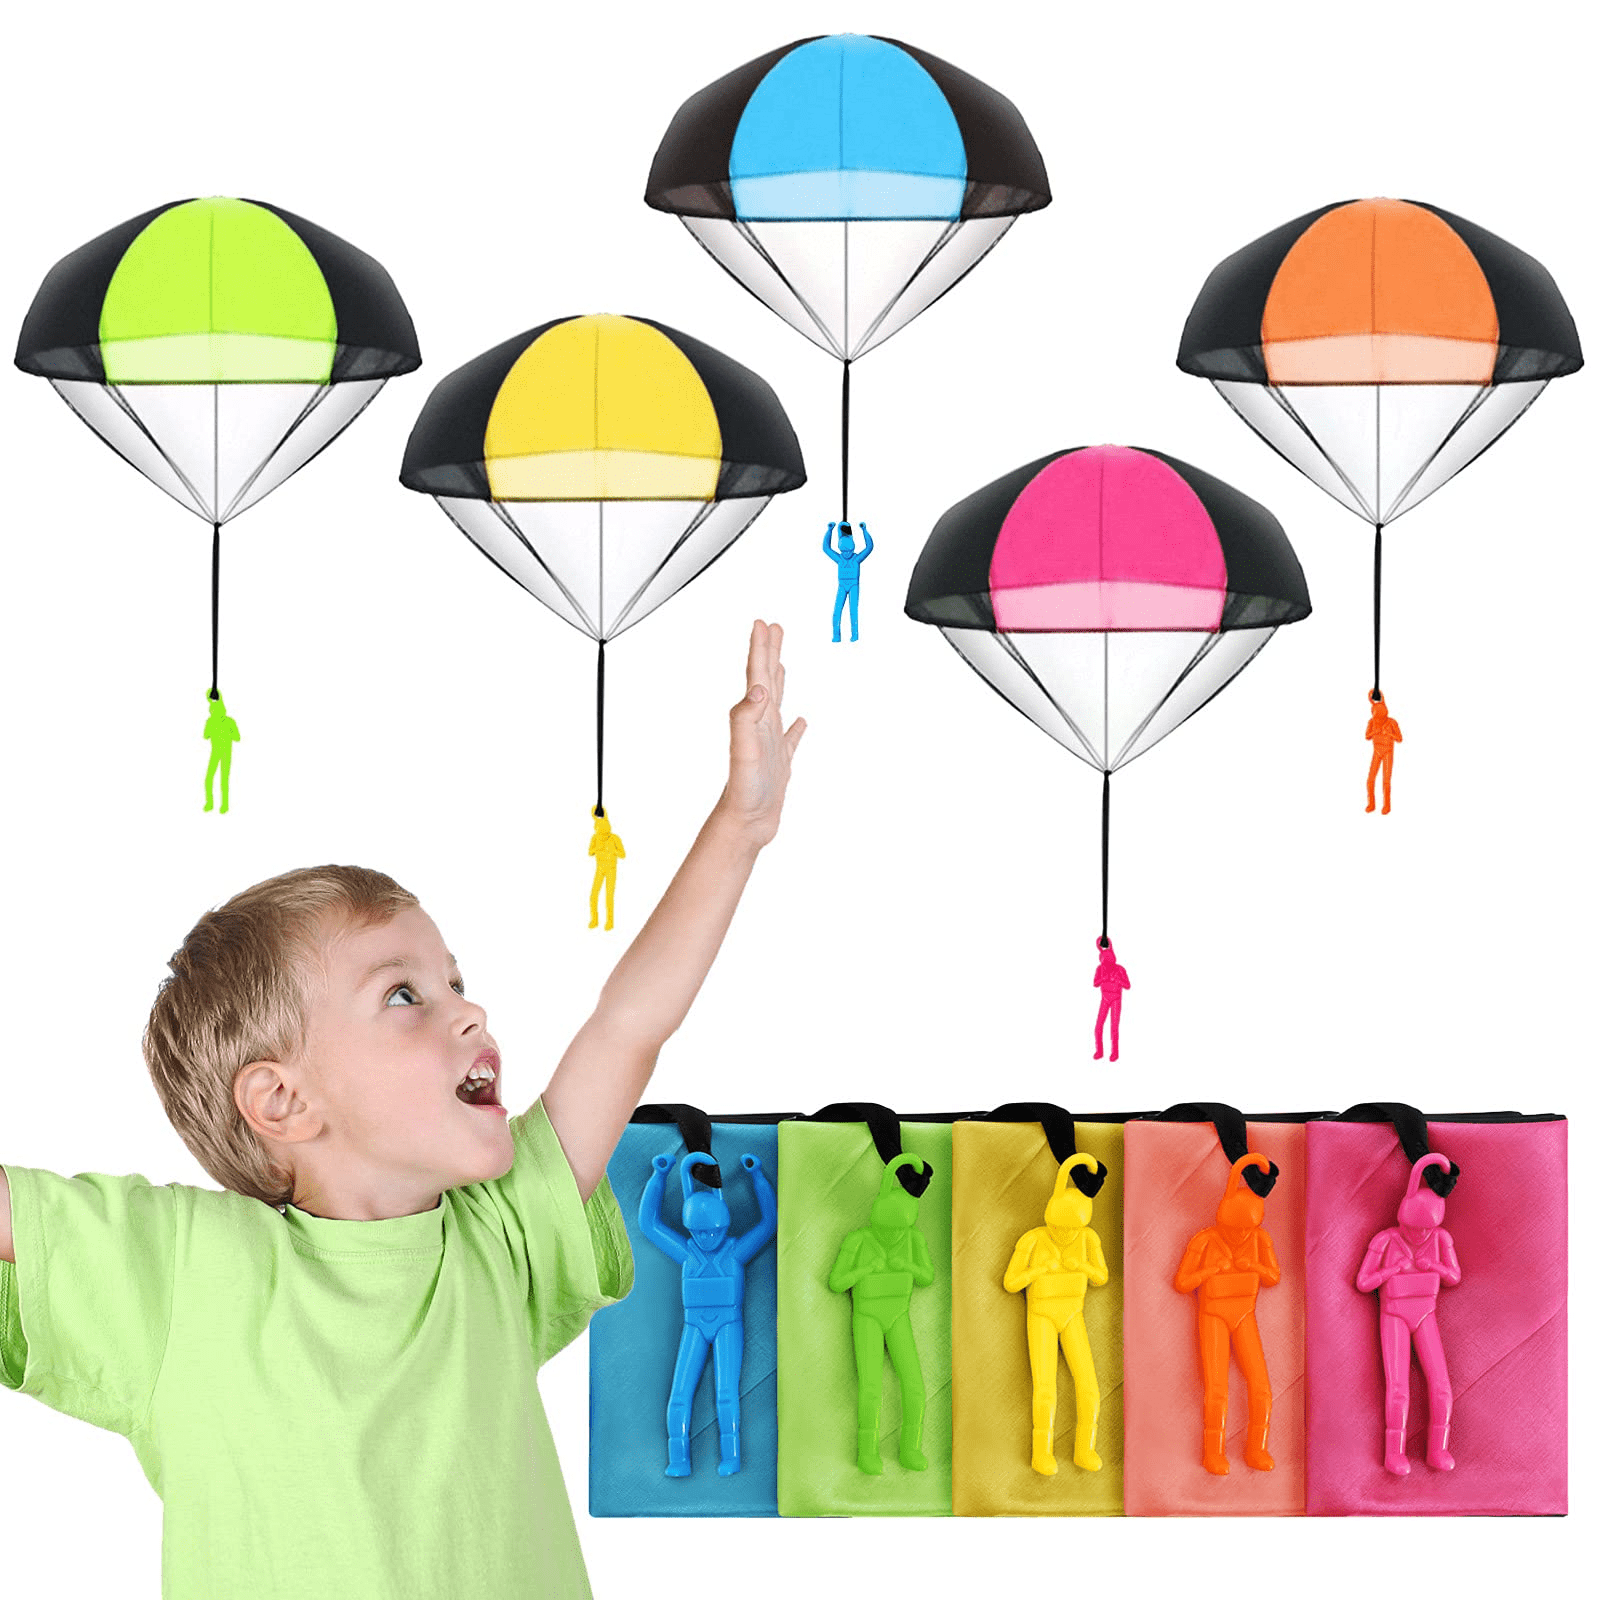 YeahiBaby 24PCS Mini Kids Parachute Hand Throwing Parachute Toy Children Educational Parachute with Figure Soldier Assorted Color and Style